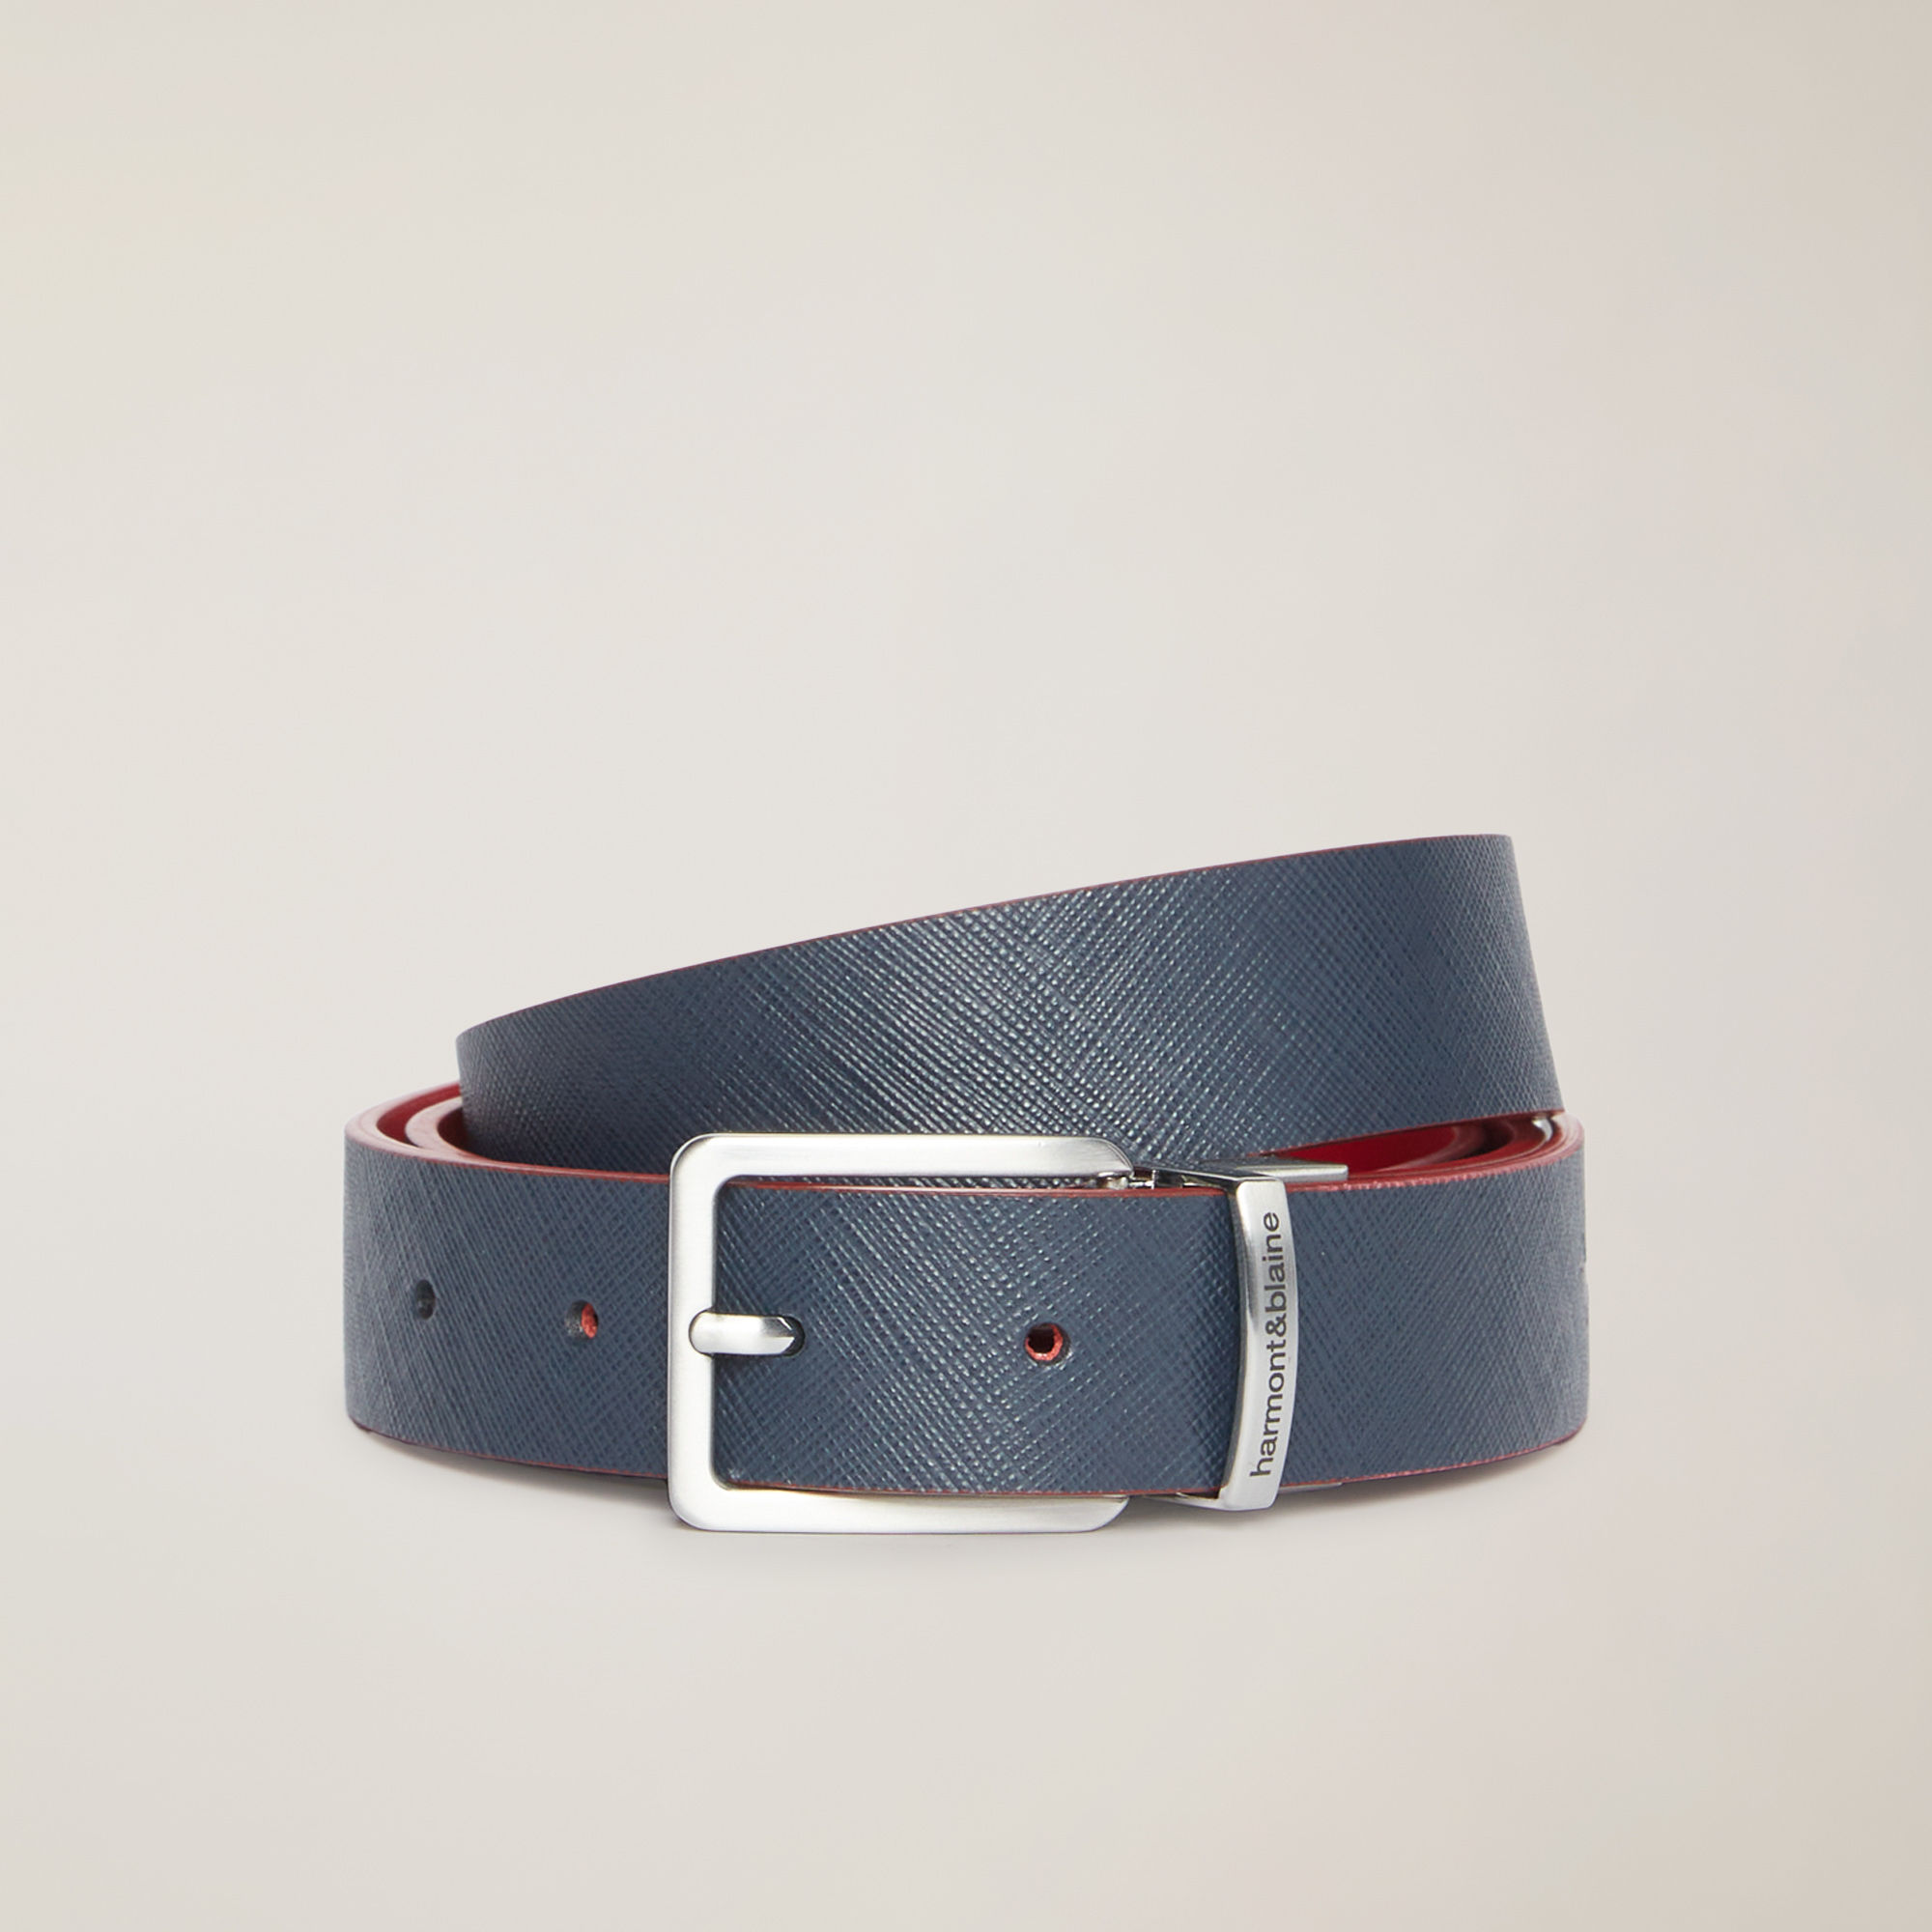 Two-Tone Belt With Lettering